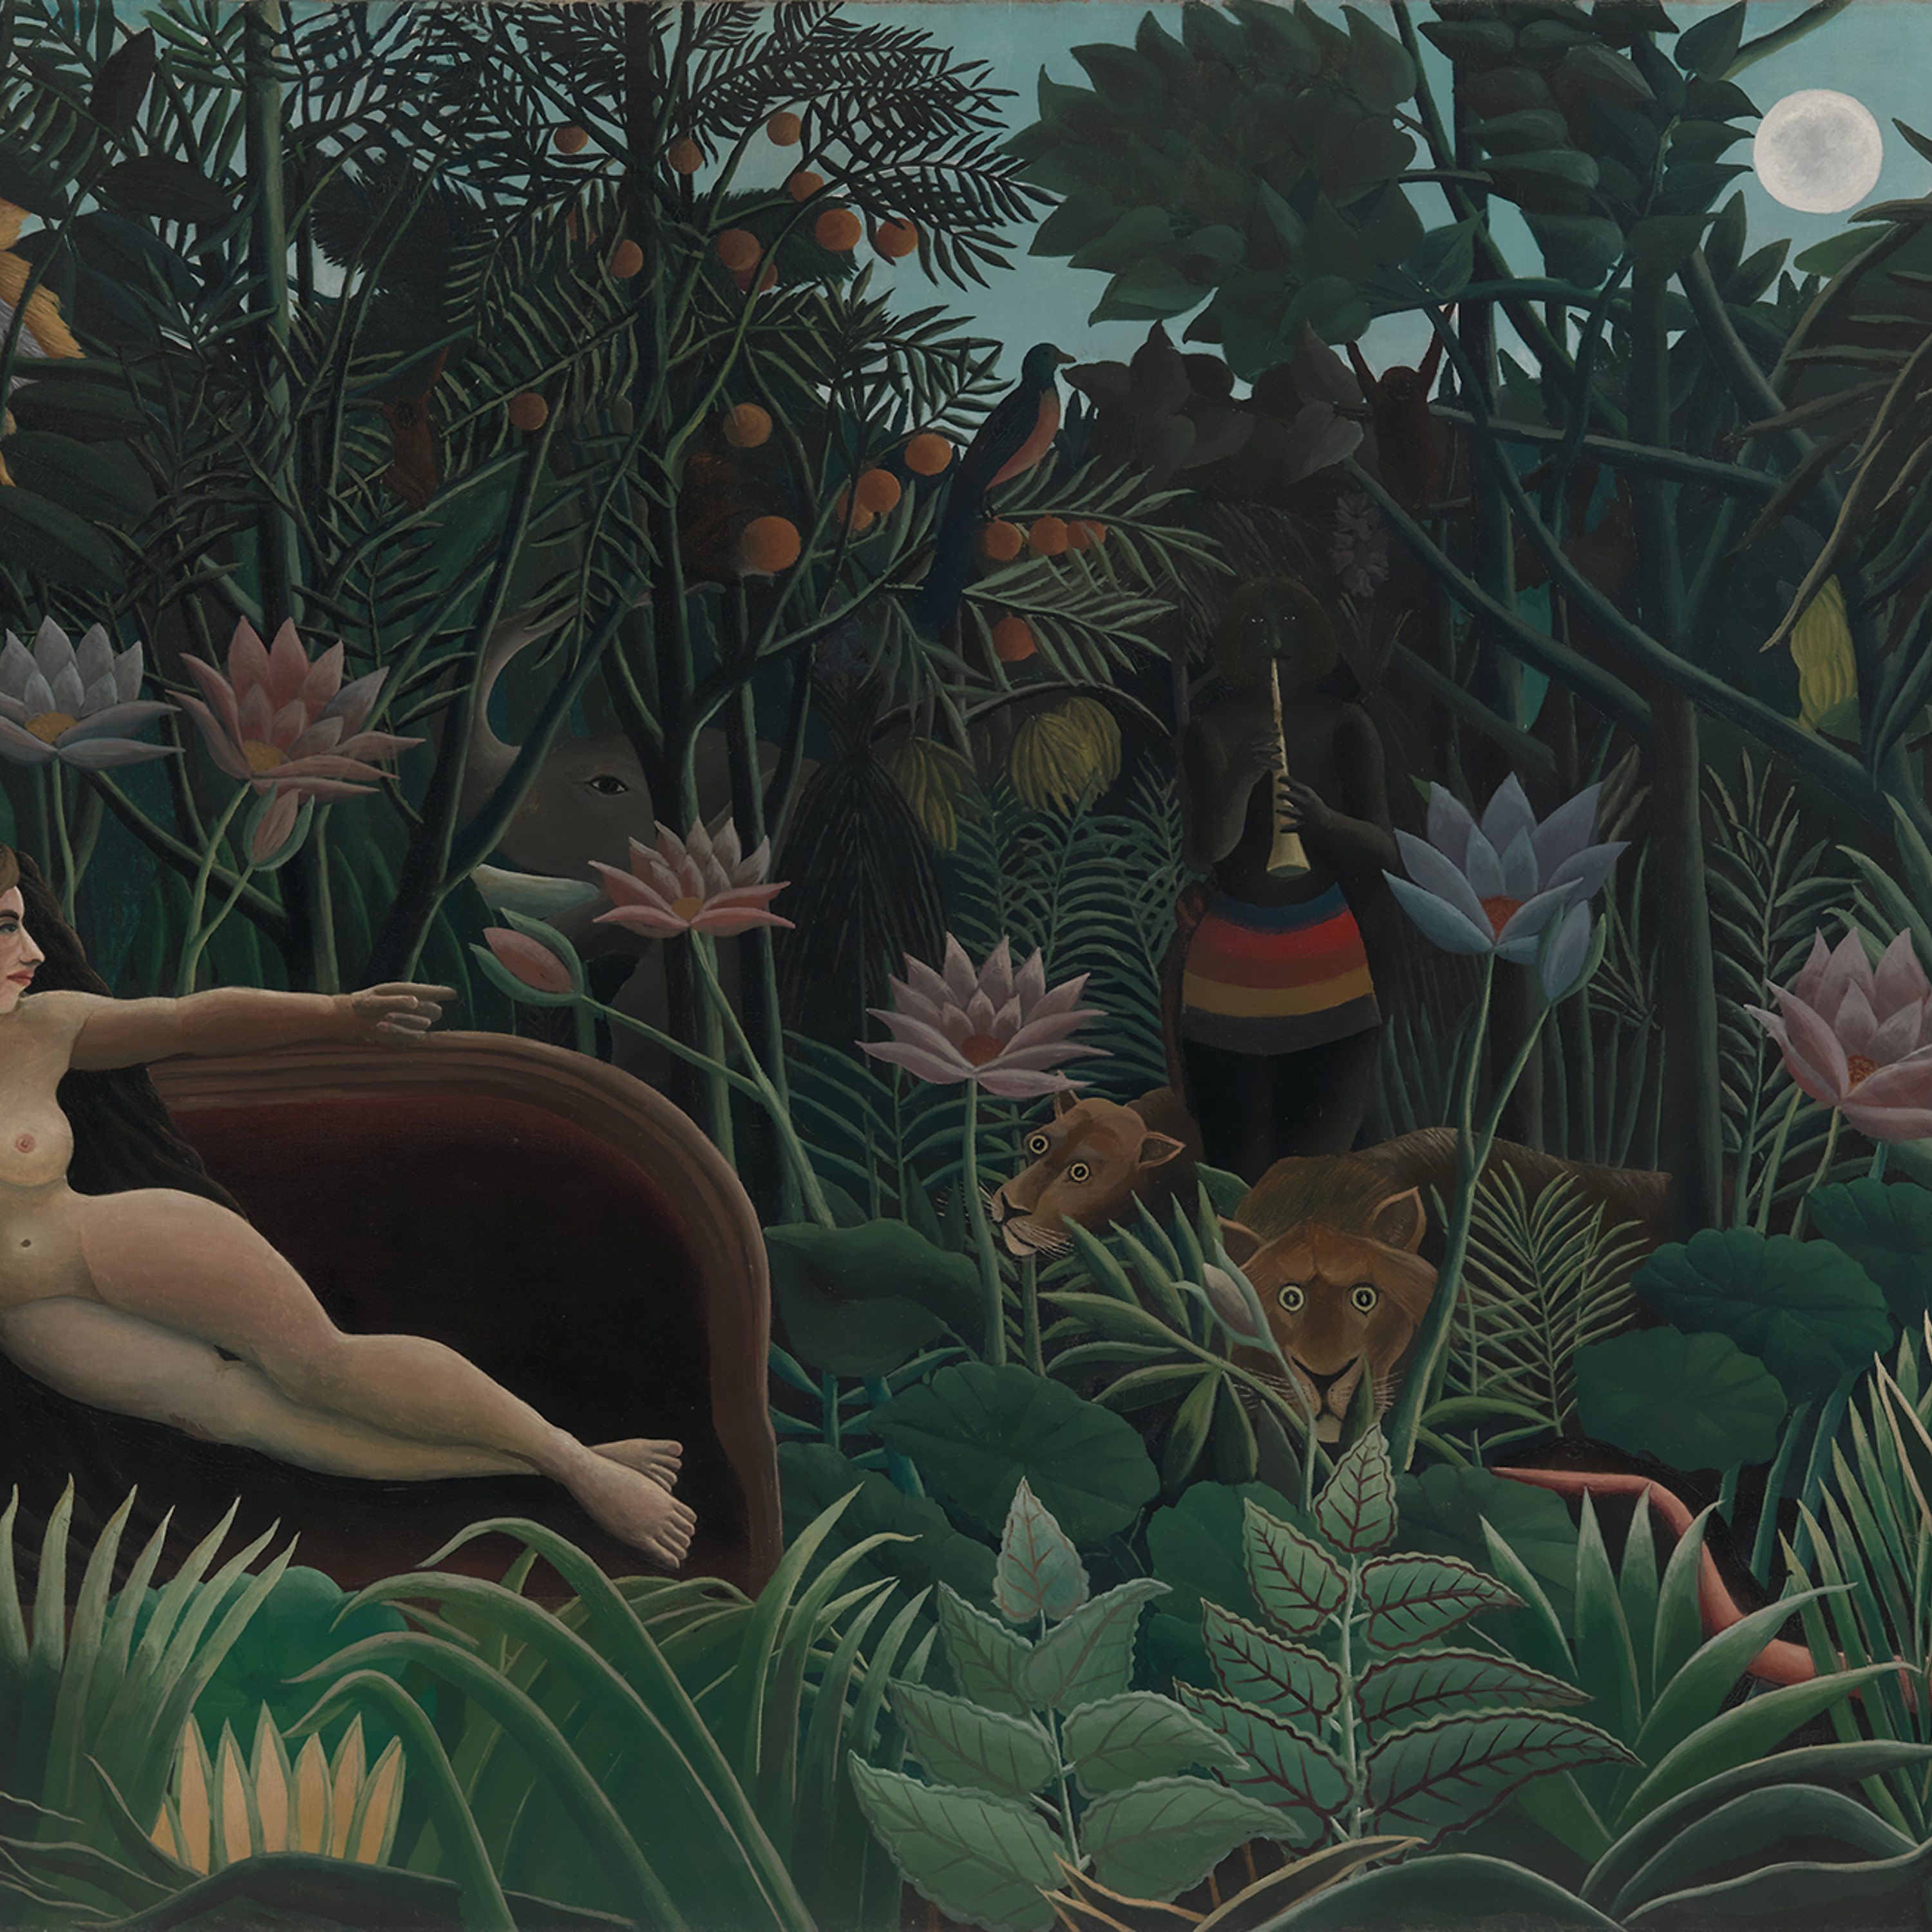 Lady Ruth Rogers on Henri Rousseau's The Dream